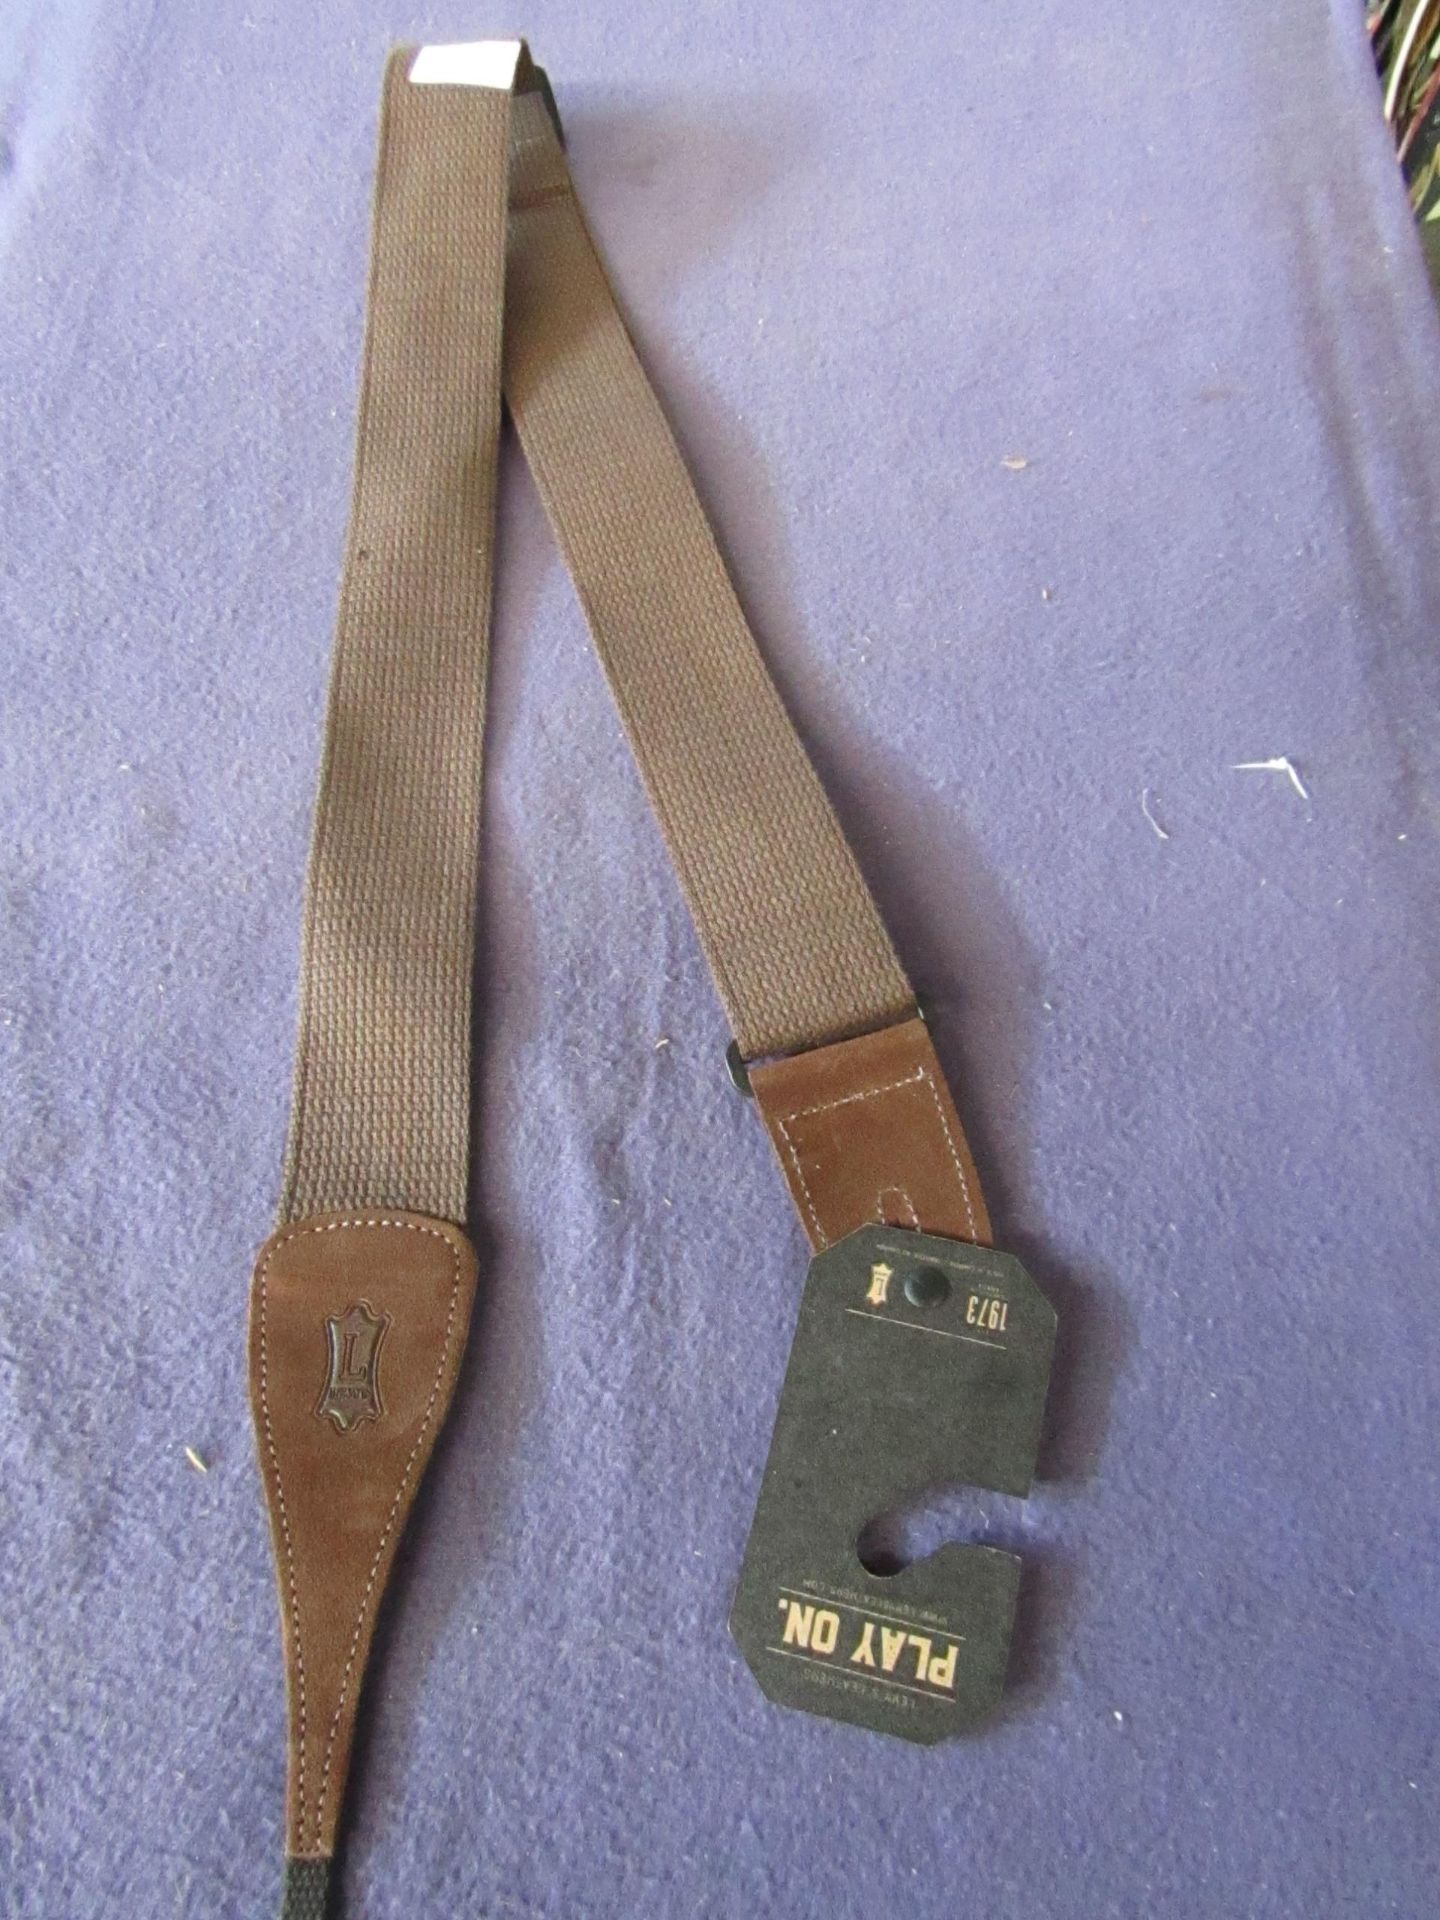 Guitar Strap - Please See Image For Design - Unused, No Packaging.